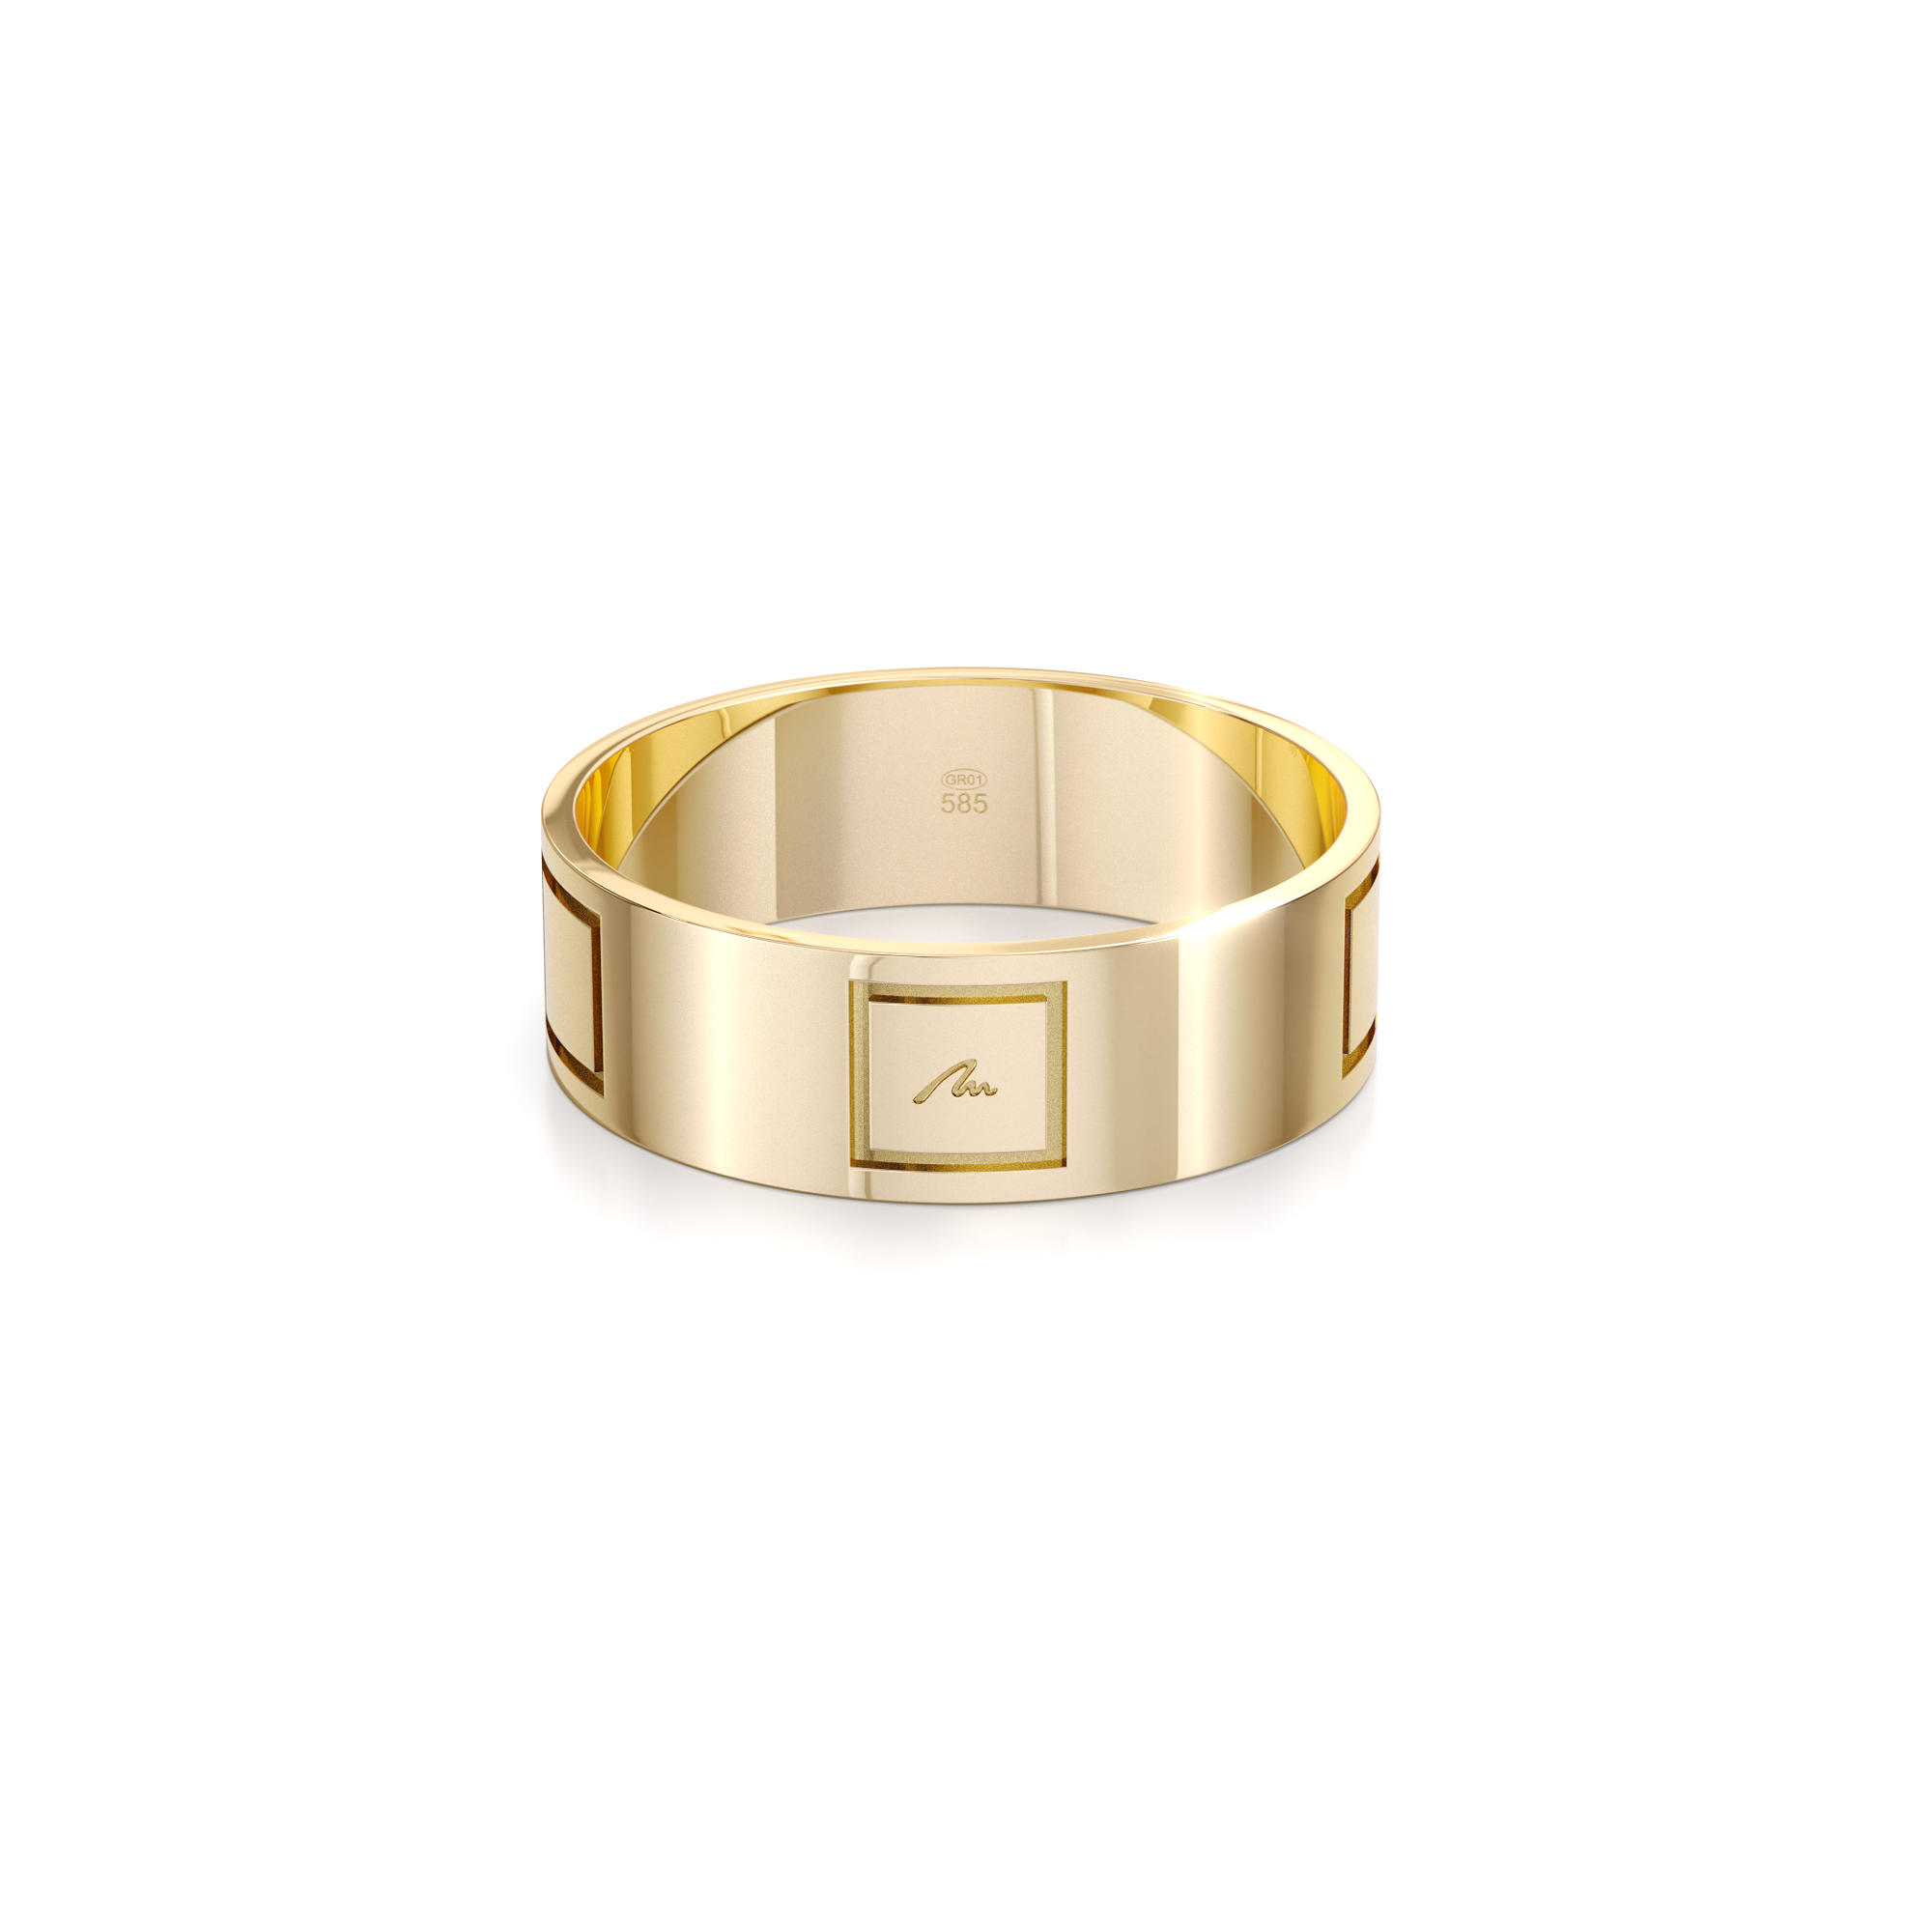 14 k yellow gold King Wide ring